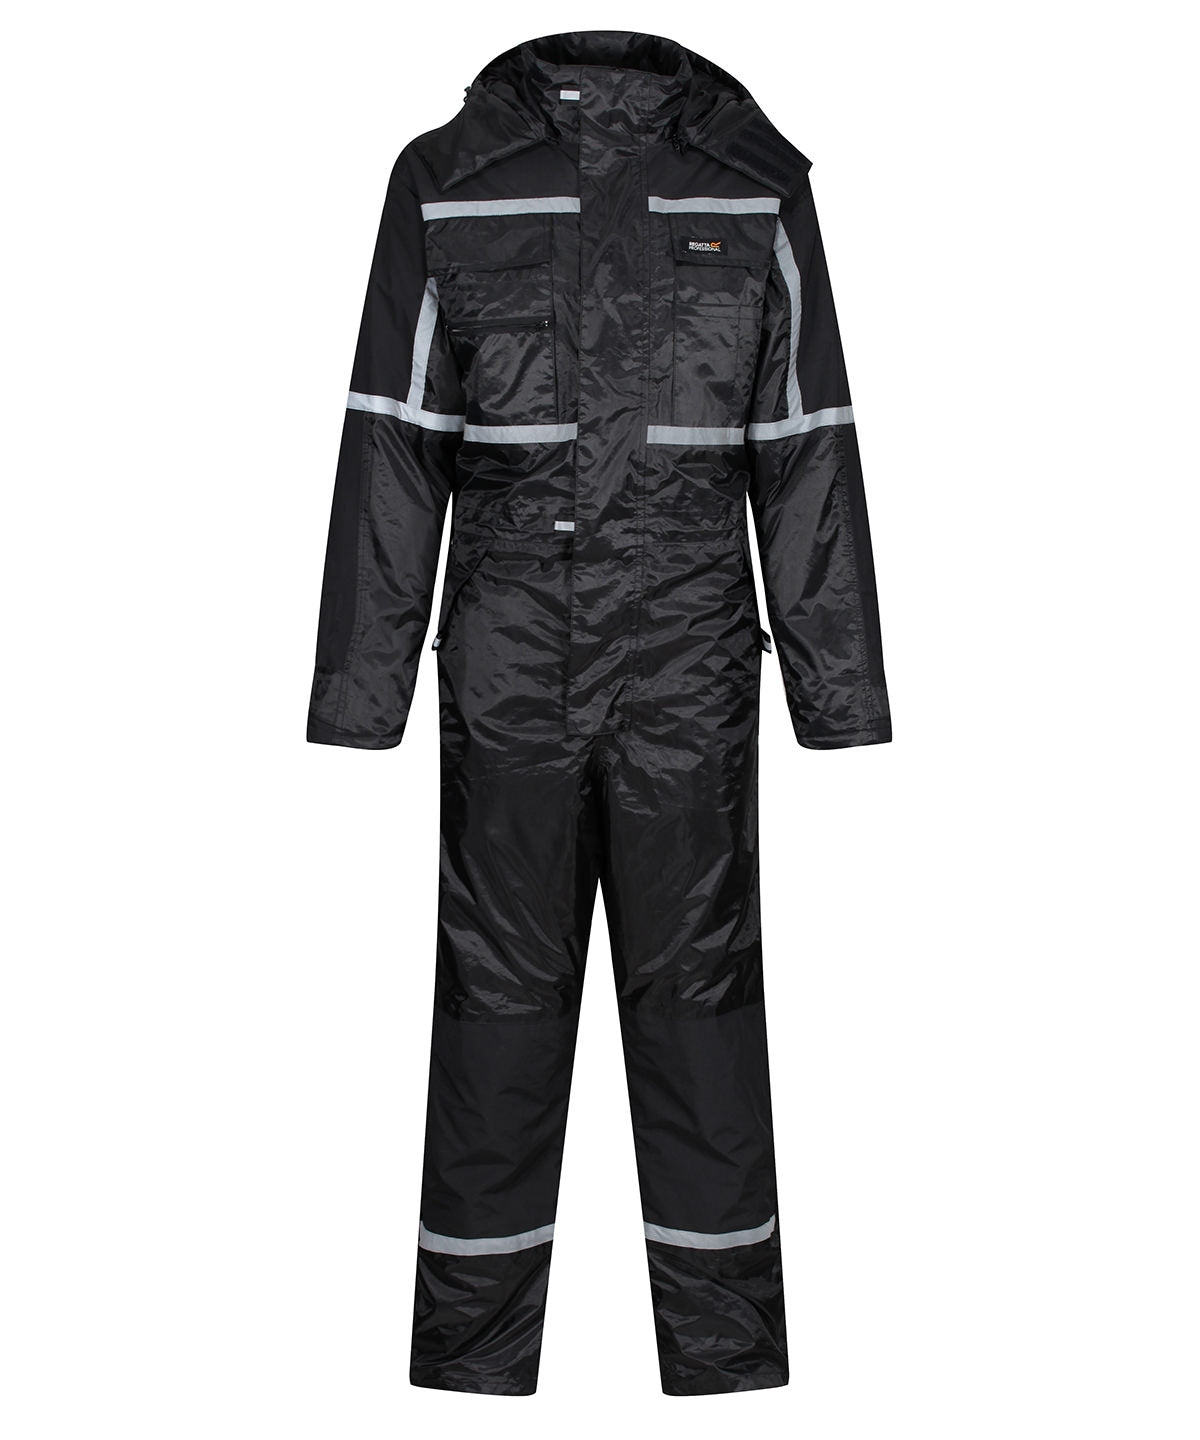 Regatta Waterproof Overalls, Padded Insulated Coverall - RG038